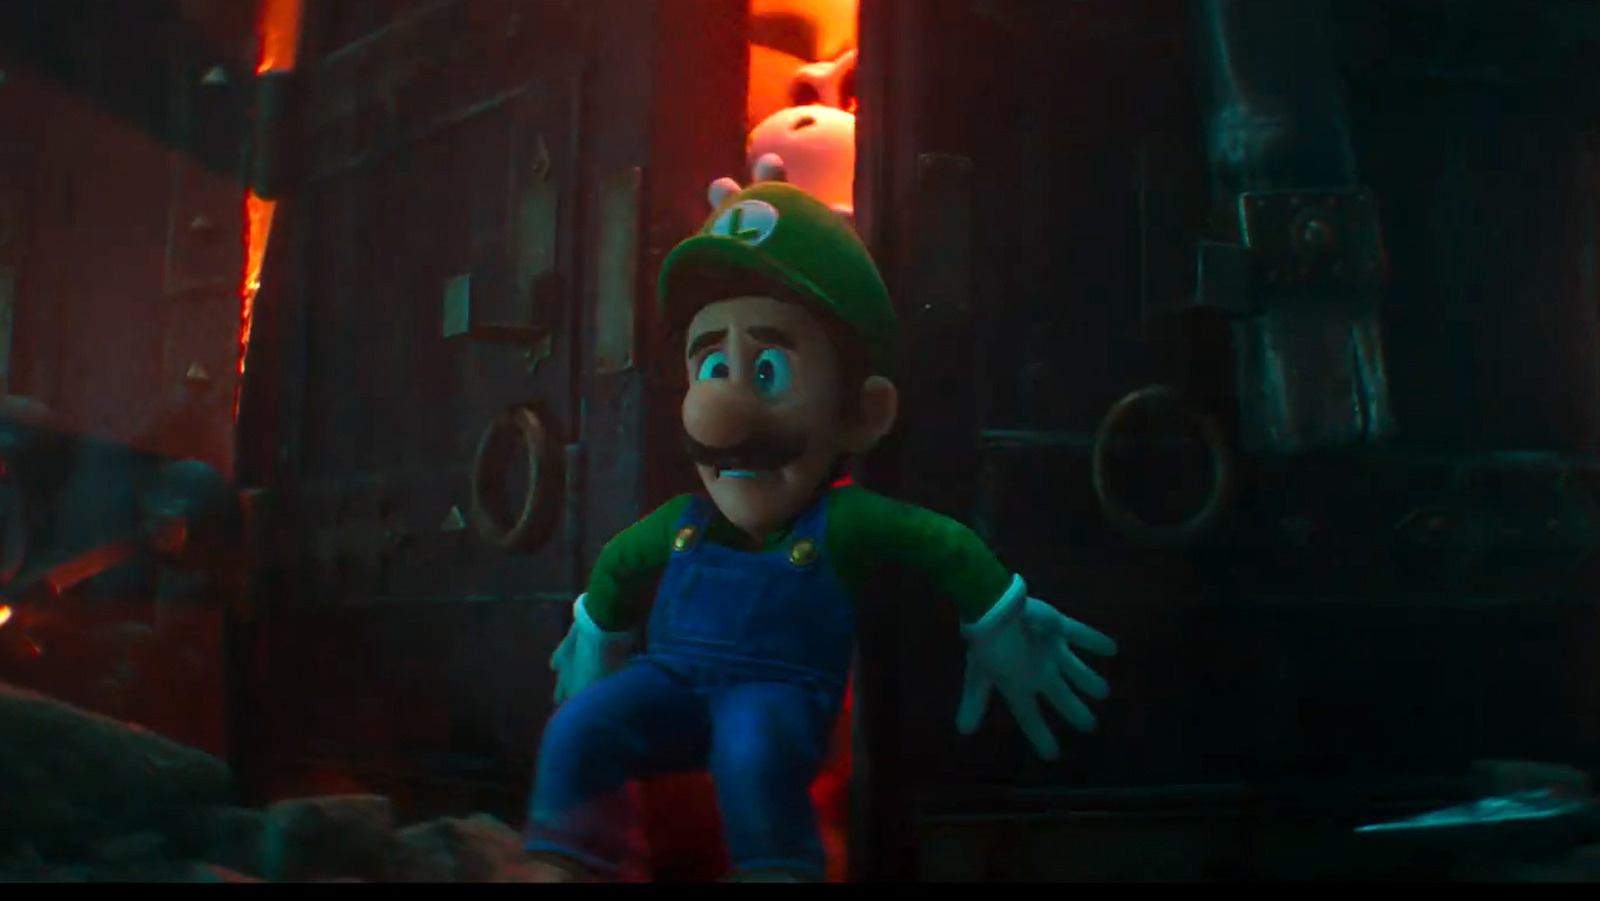 Charlie Day Wants a Luigi's Mansion Movie?! (Thoughts and Ideas